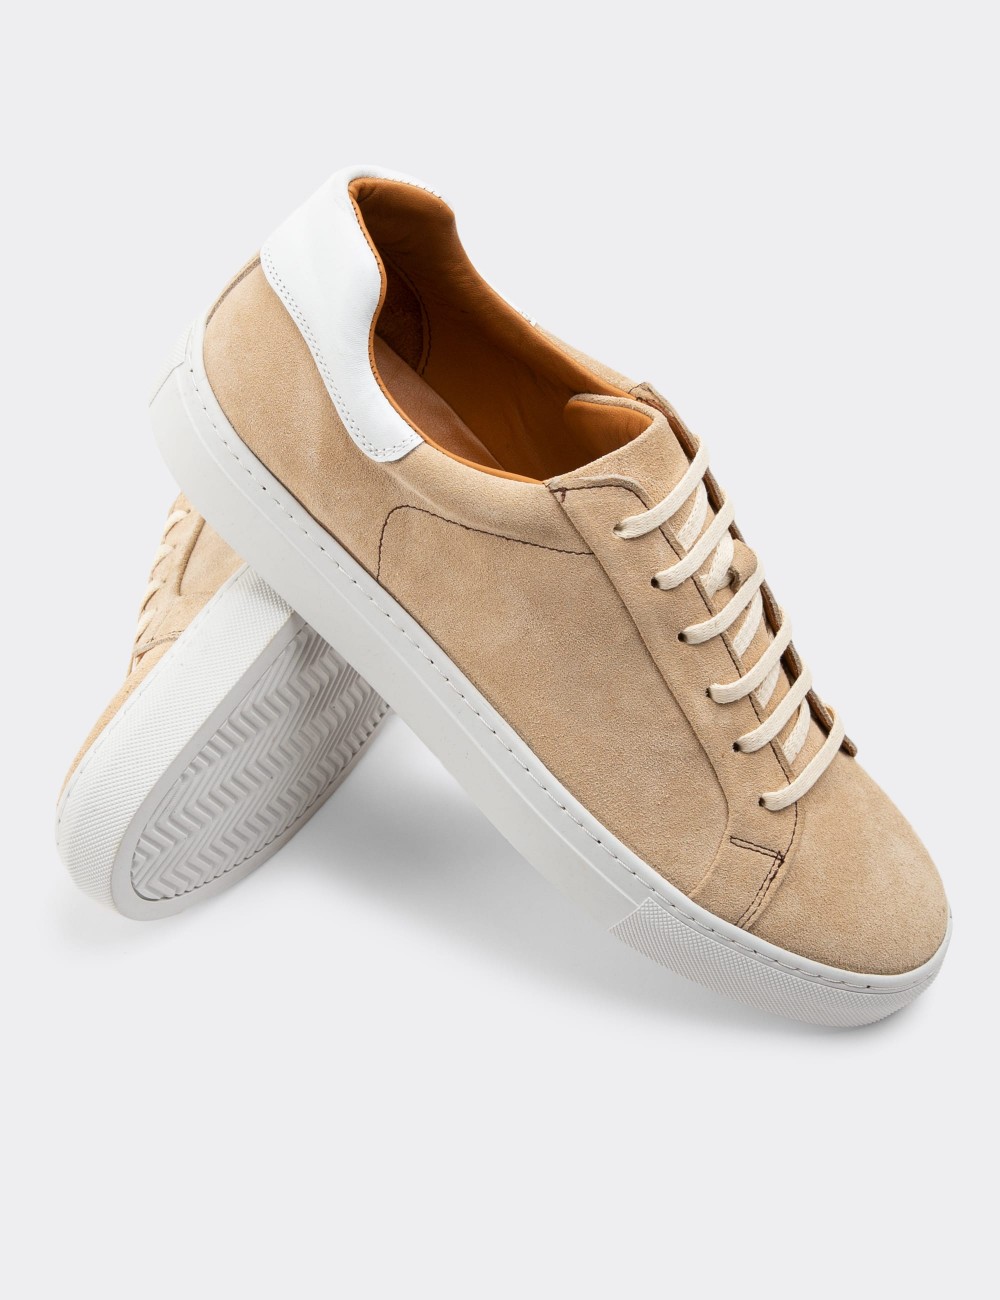 Beige Suede Leather Sneakers - 01829MBEJC05